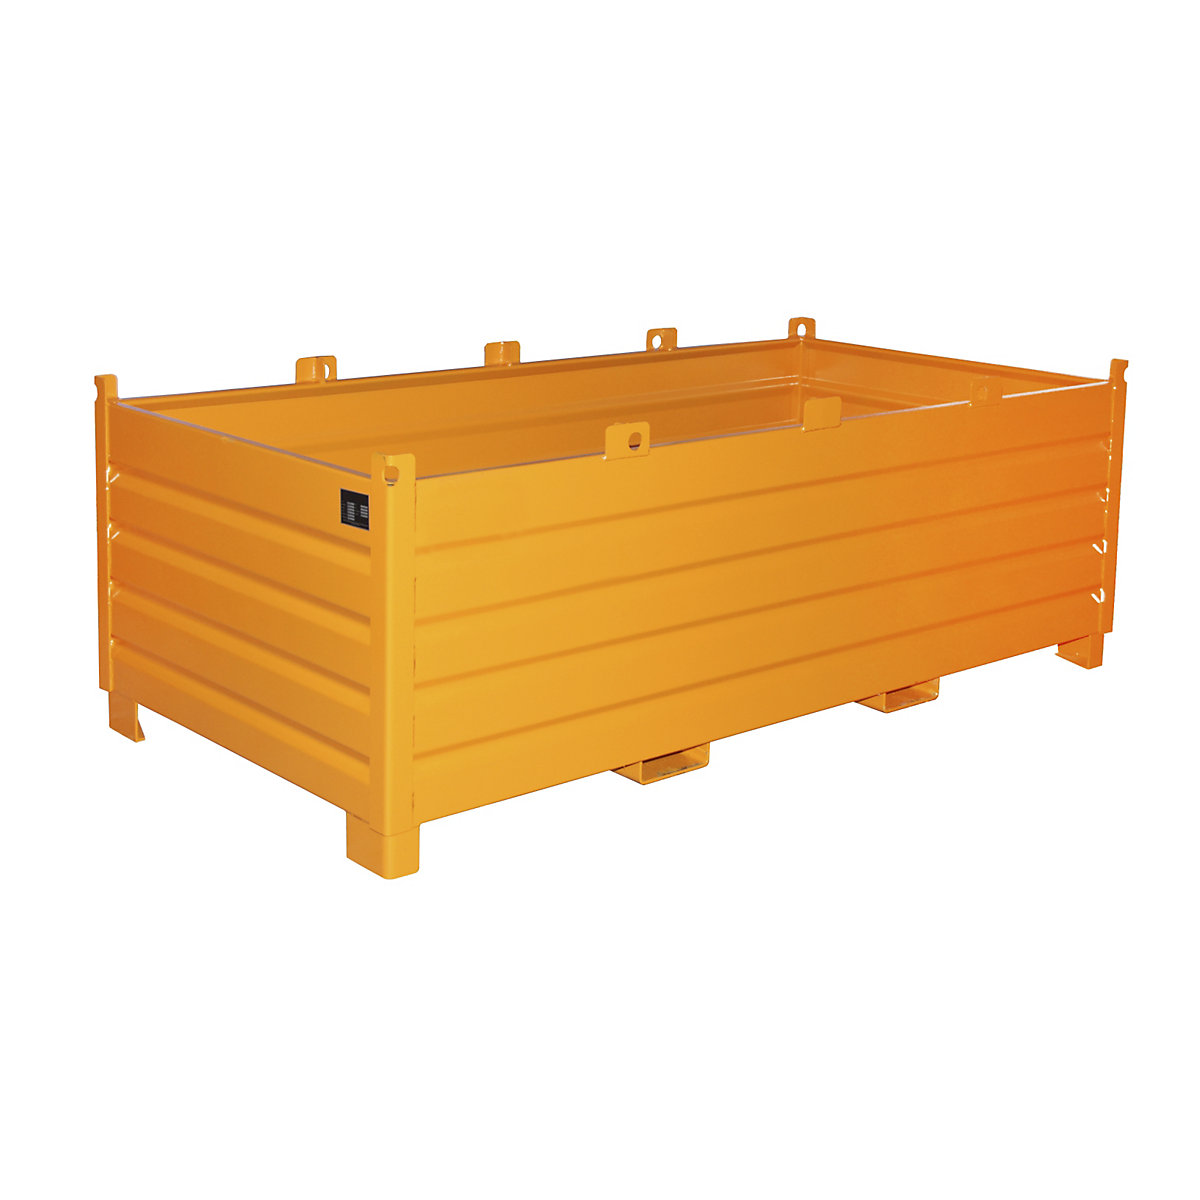 Waste container - eurokraft pro